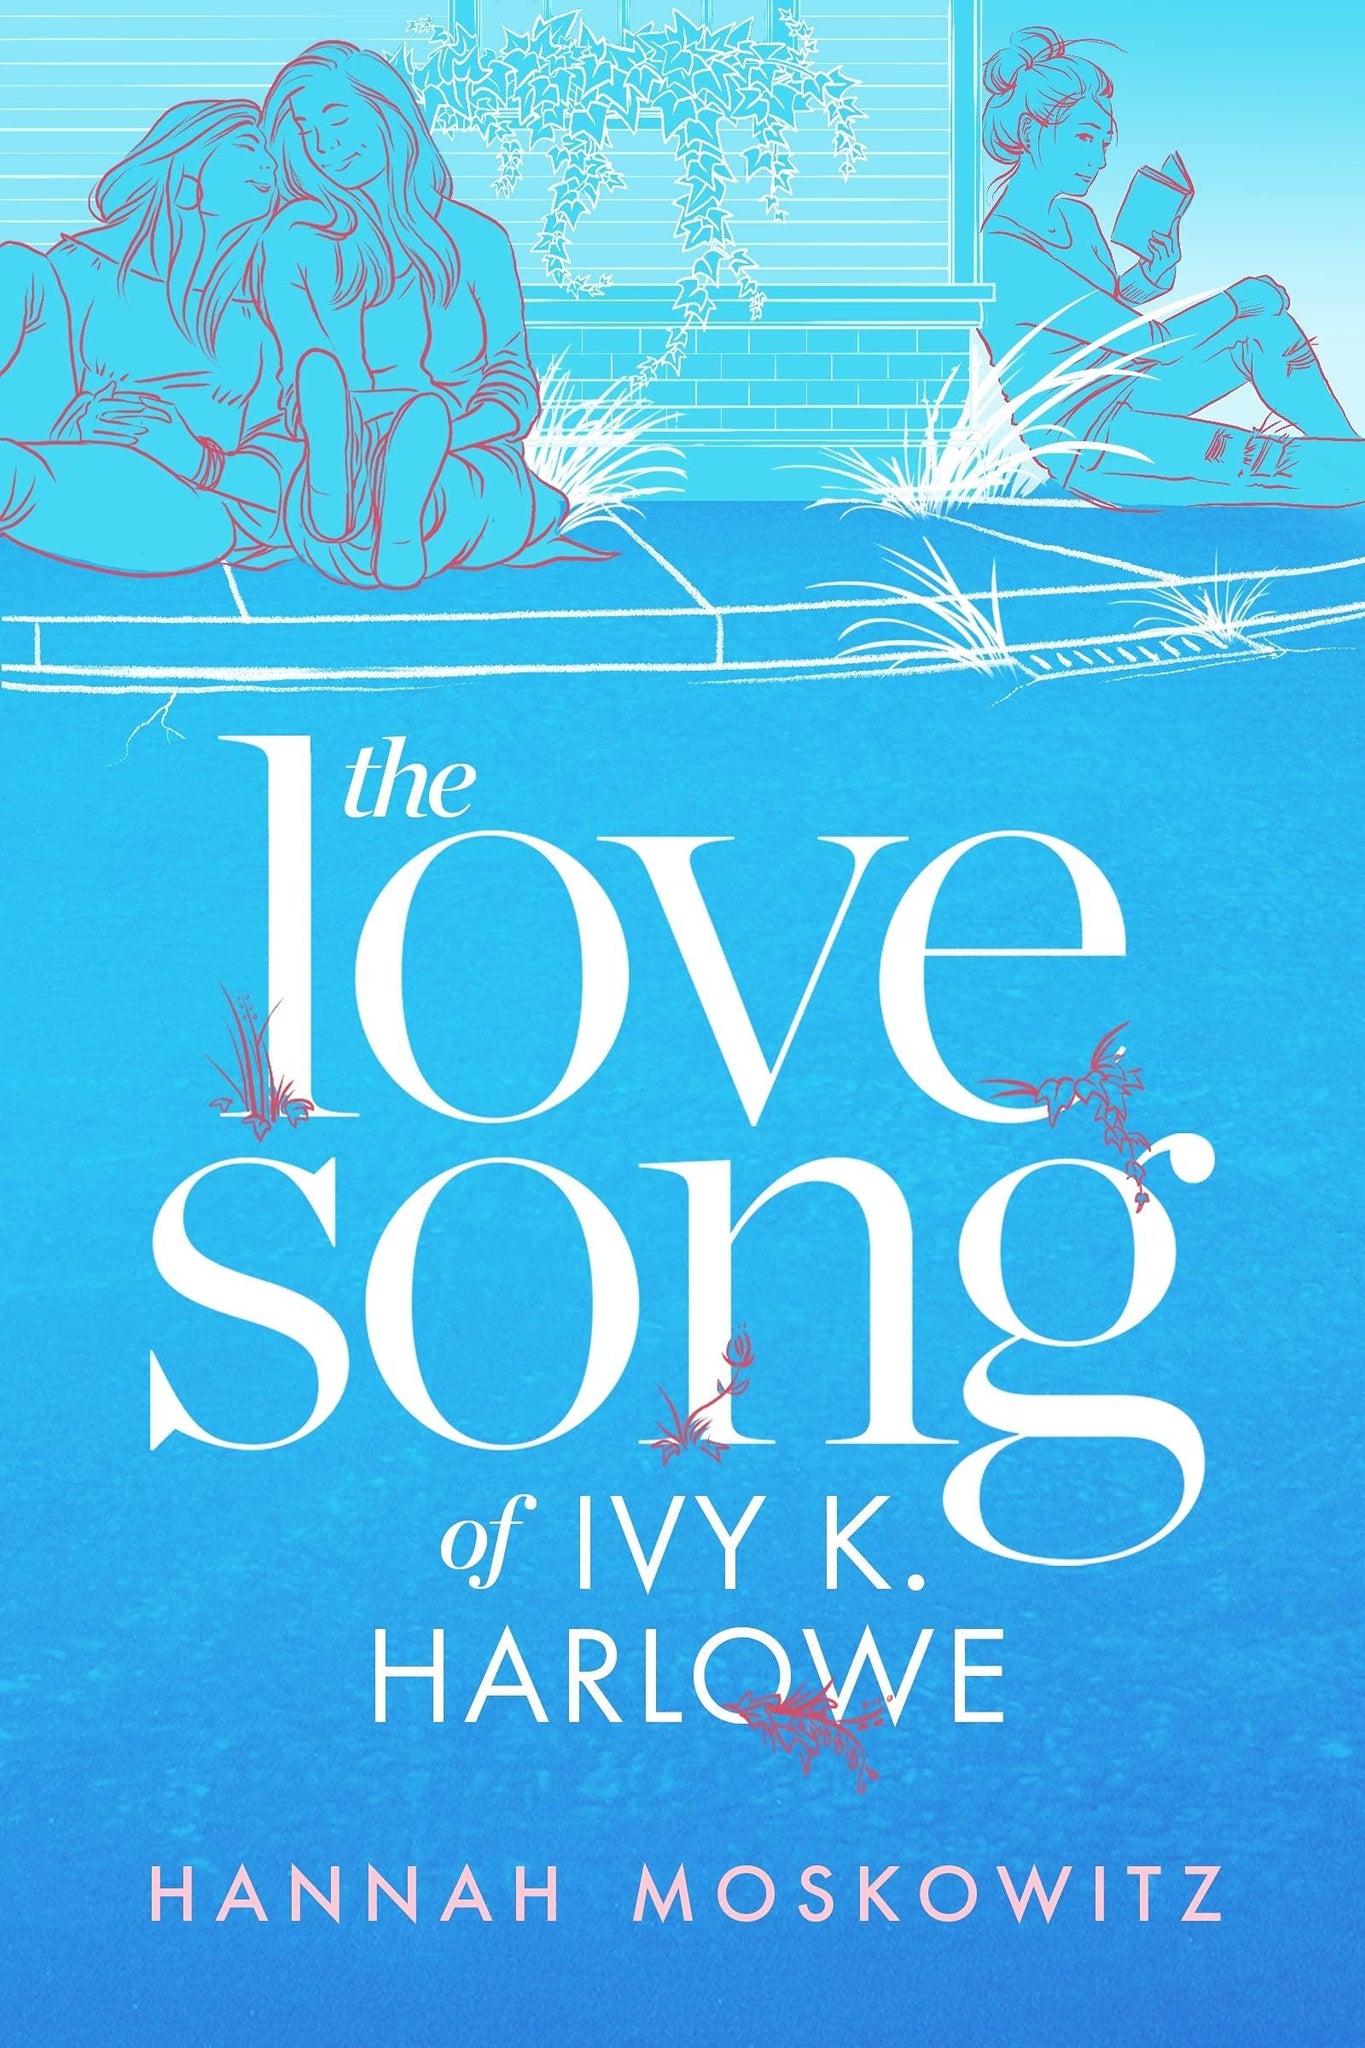 The Love Song of Ivy K. Harlowe - ShopQueer.co